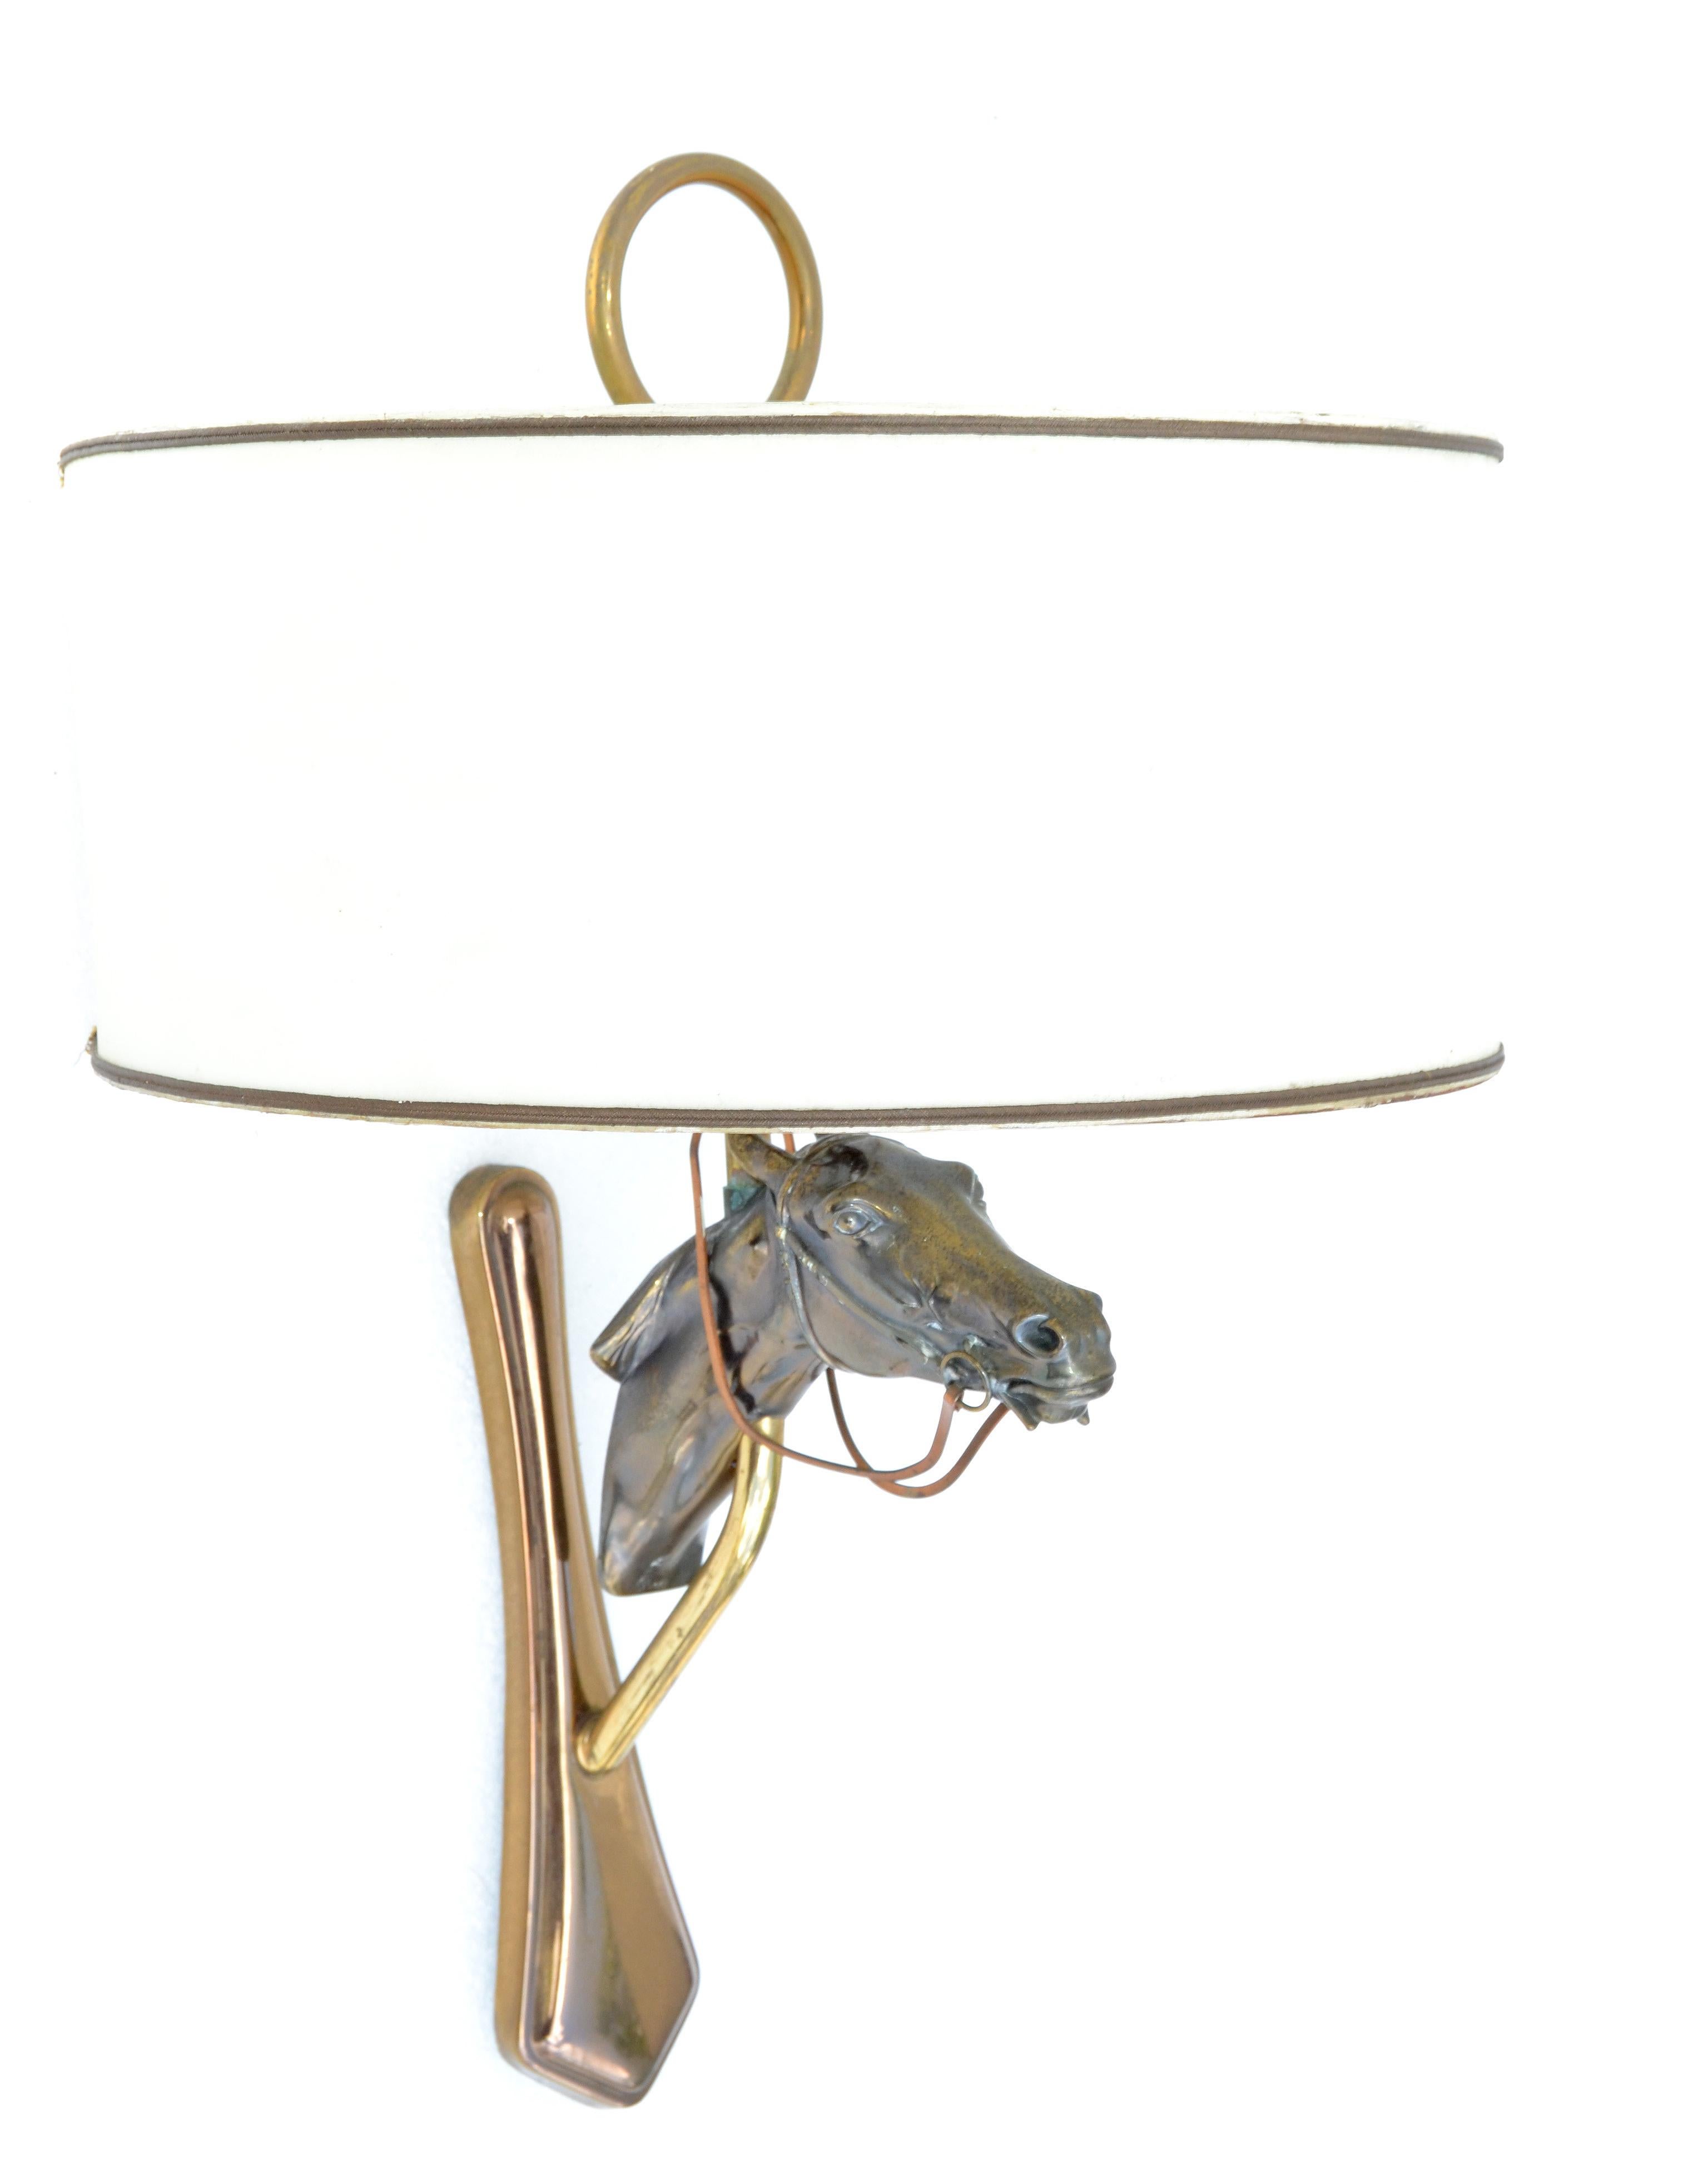 Jacques Adnet Style Bronze Horse Sconce Wall Lamp French Neoclassical For Sale 7